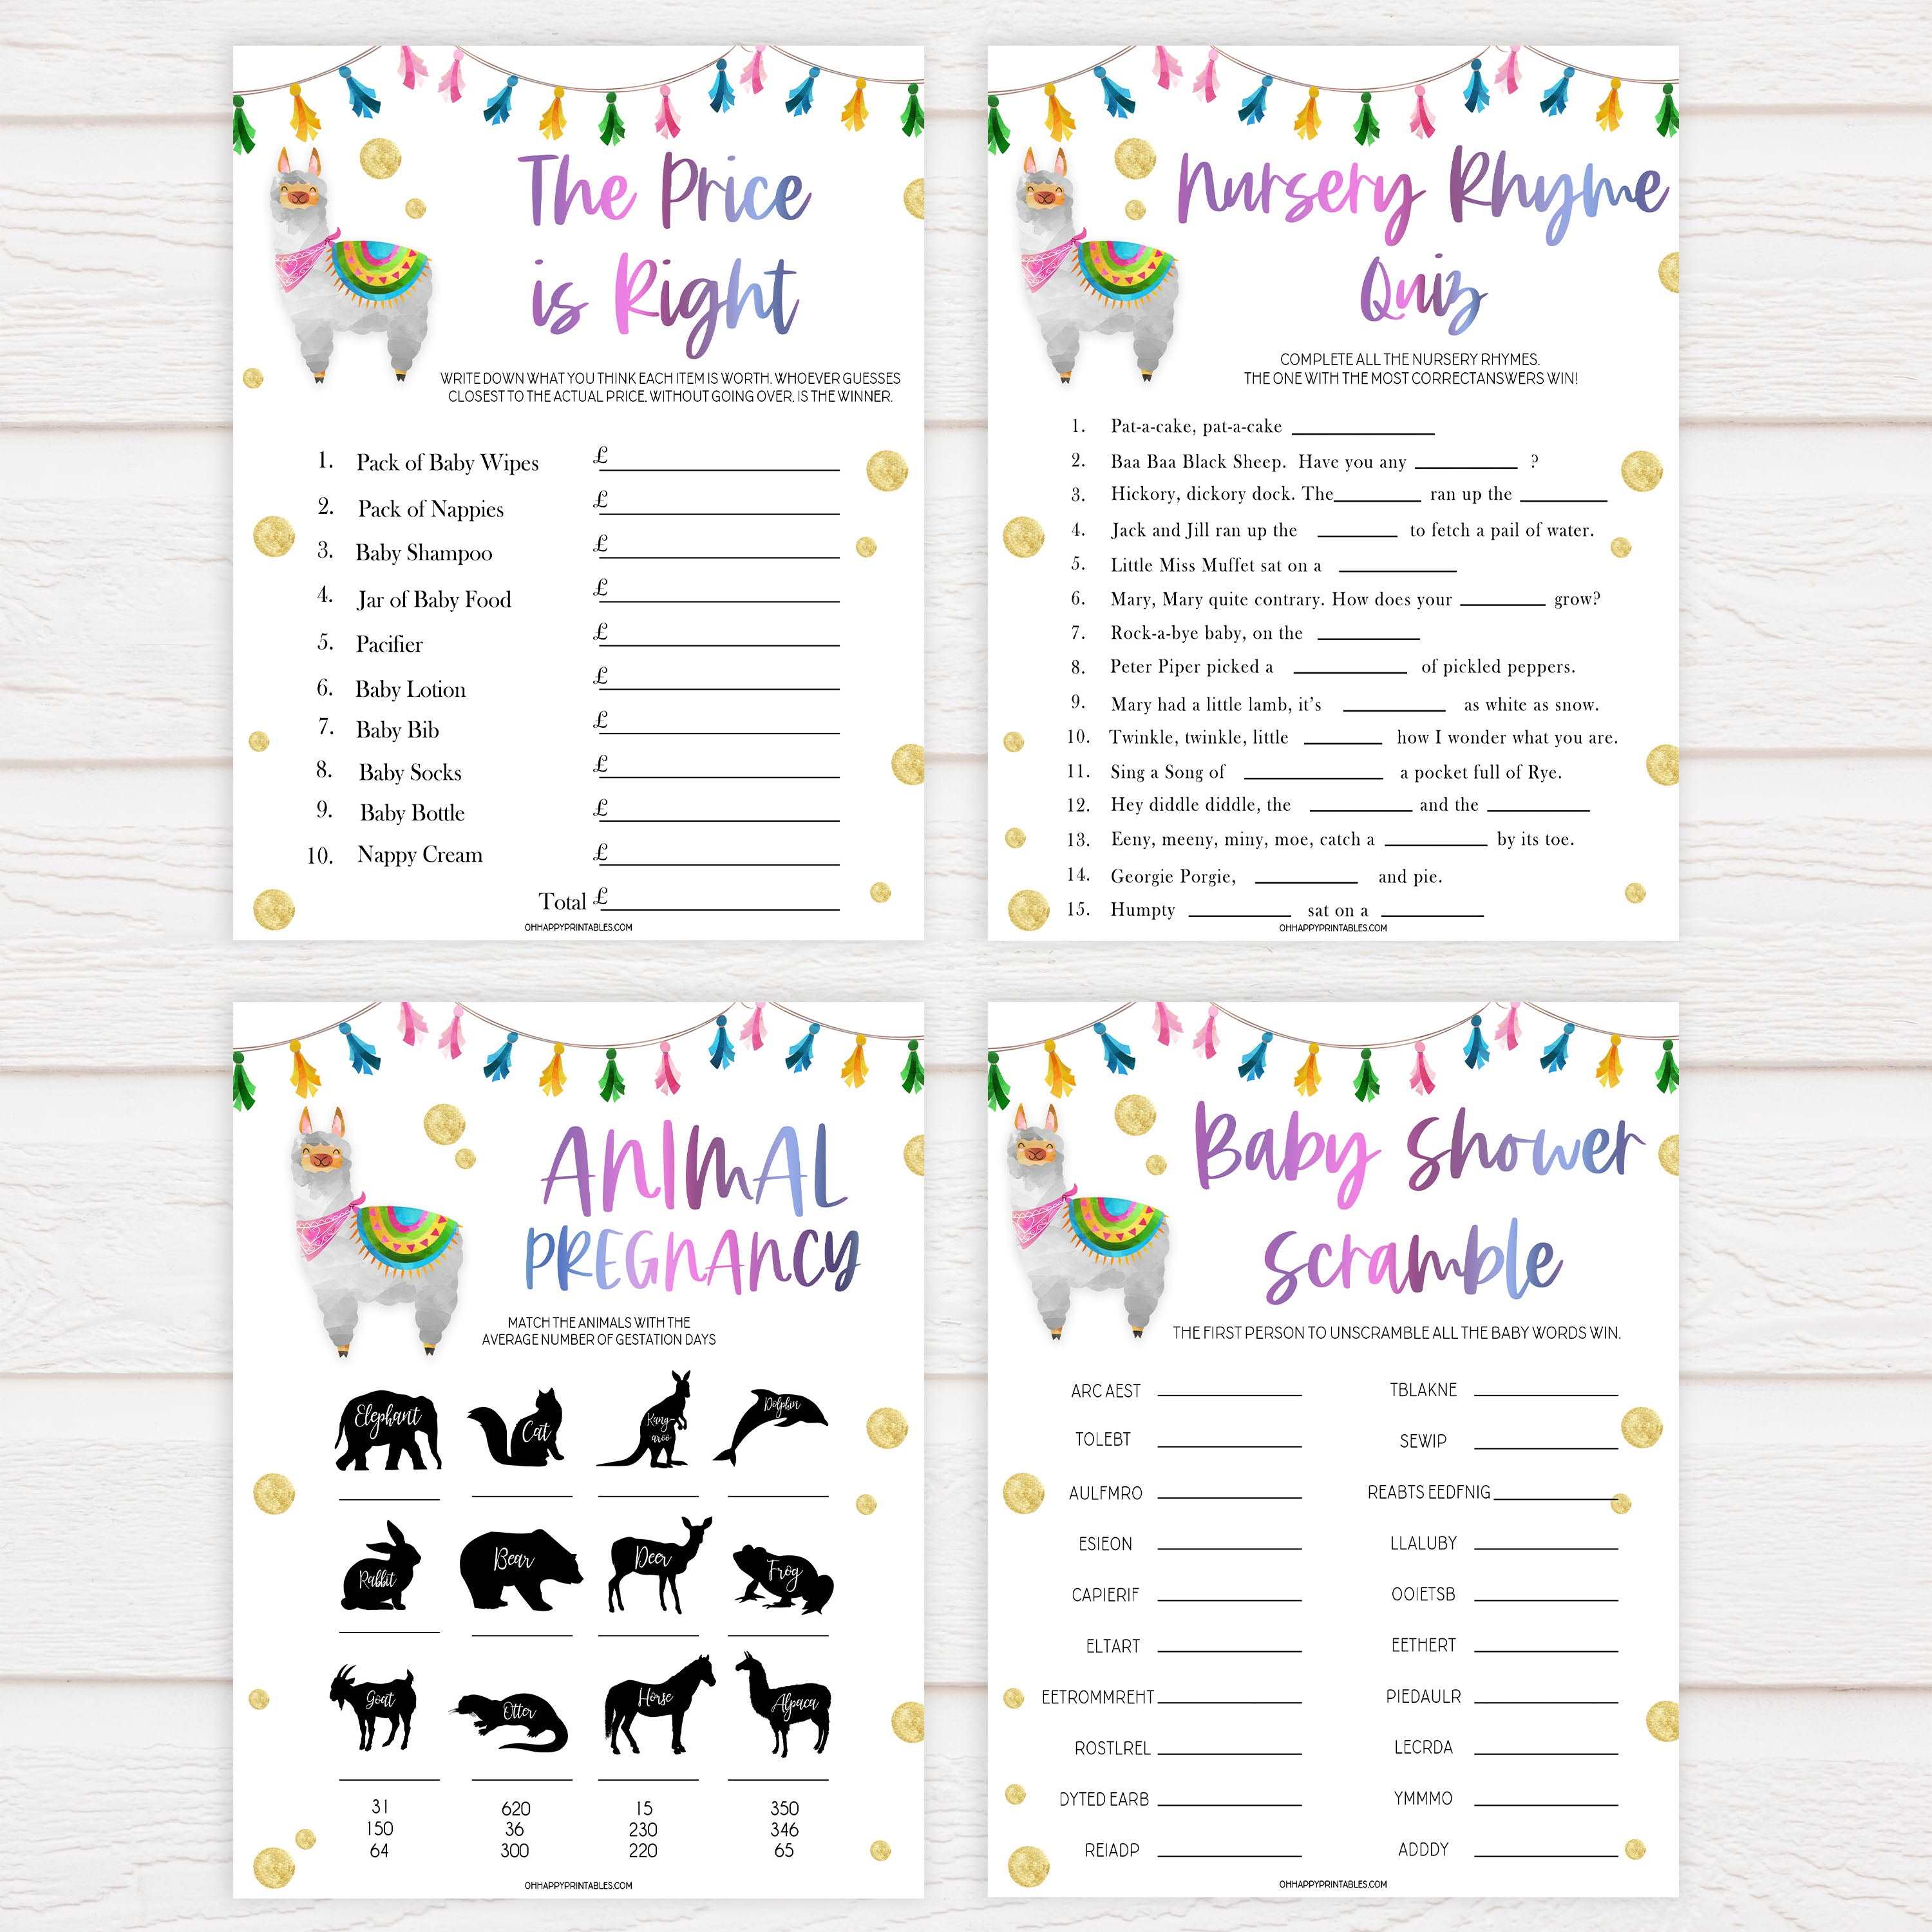 10 baby shower games bundle, baby games pack, Printable baby shower games, llama fiesta fun baby games, baby shower games, fun baby shower ideas, top baby shower ideas, Llama fiesta shower baby shower, fiesta baby shower ideas